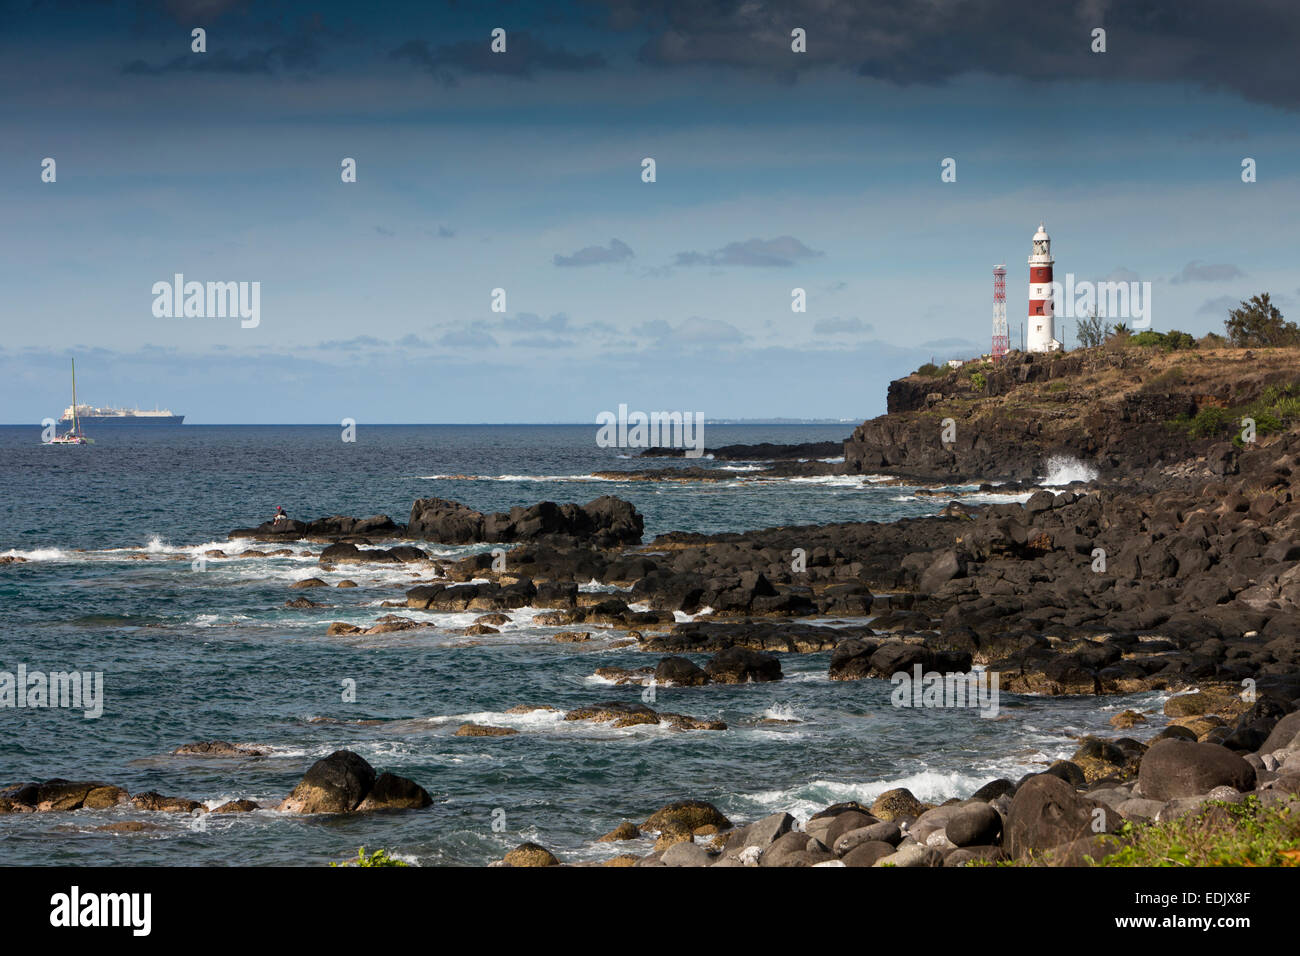 Mauritius, Albion, Pointe aux Caves, lighthouse protecting west coast sea traffic Stock Photo